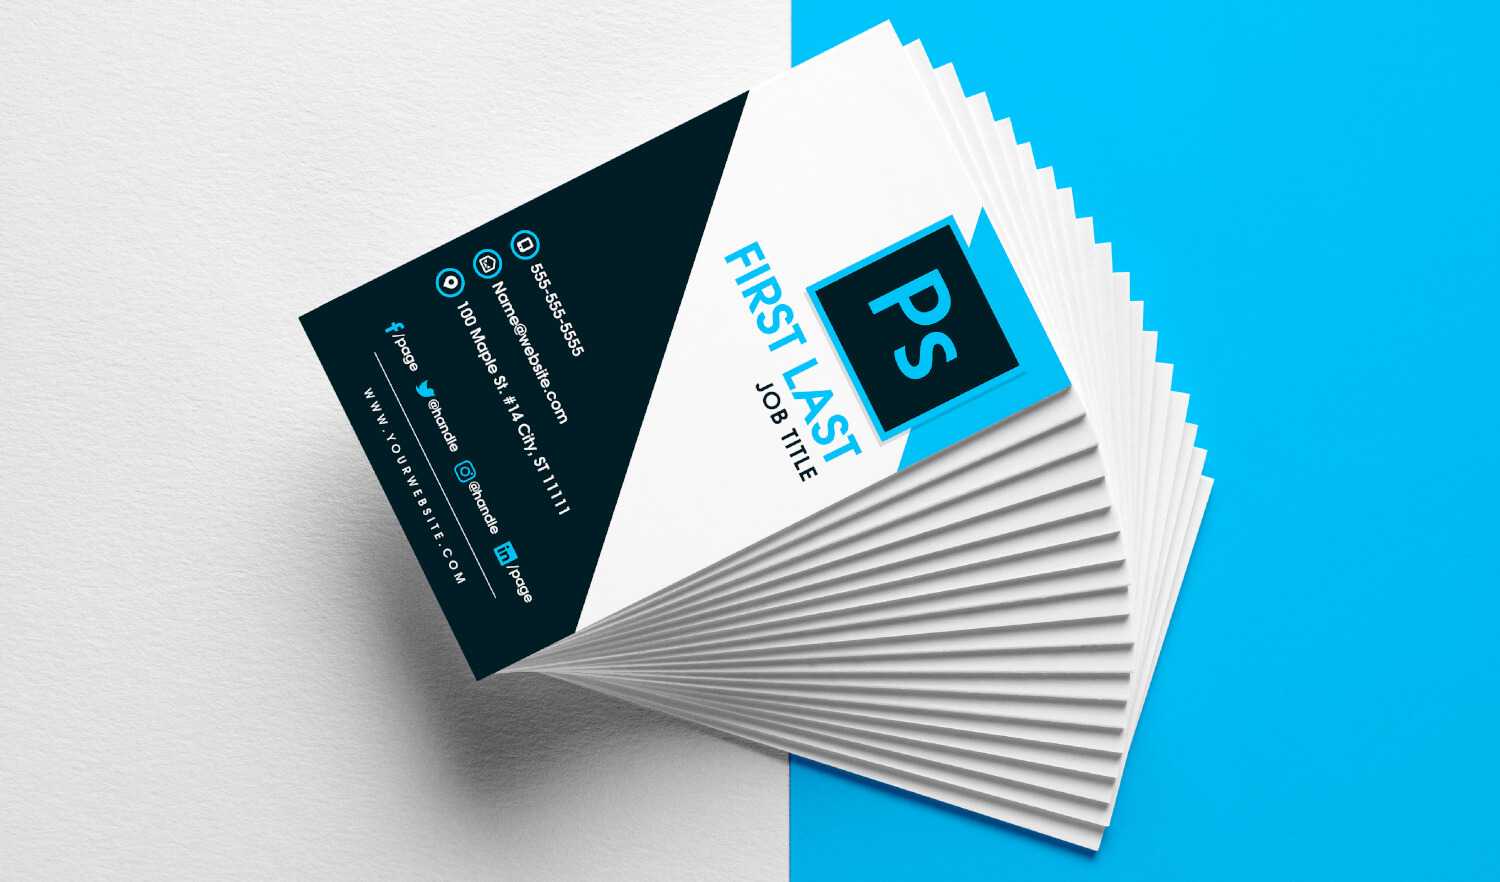 Free Vertical Business Card Template In Psd Format Intended For Free Business Card Templates In Psd Format